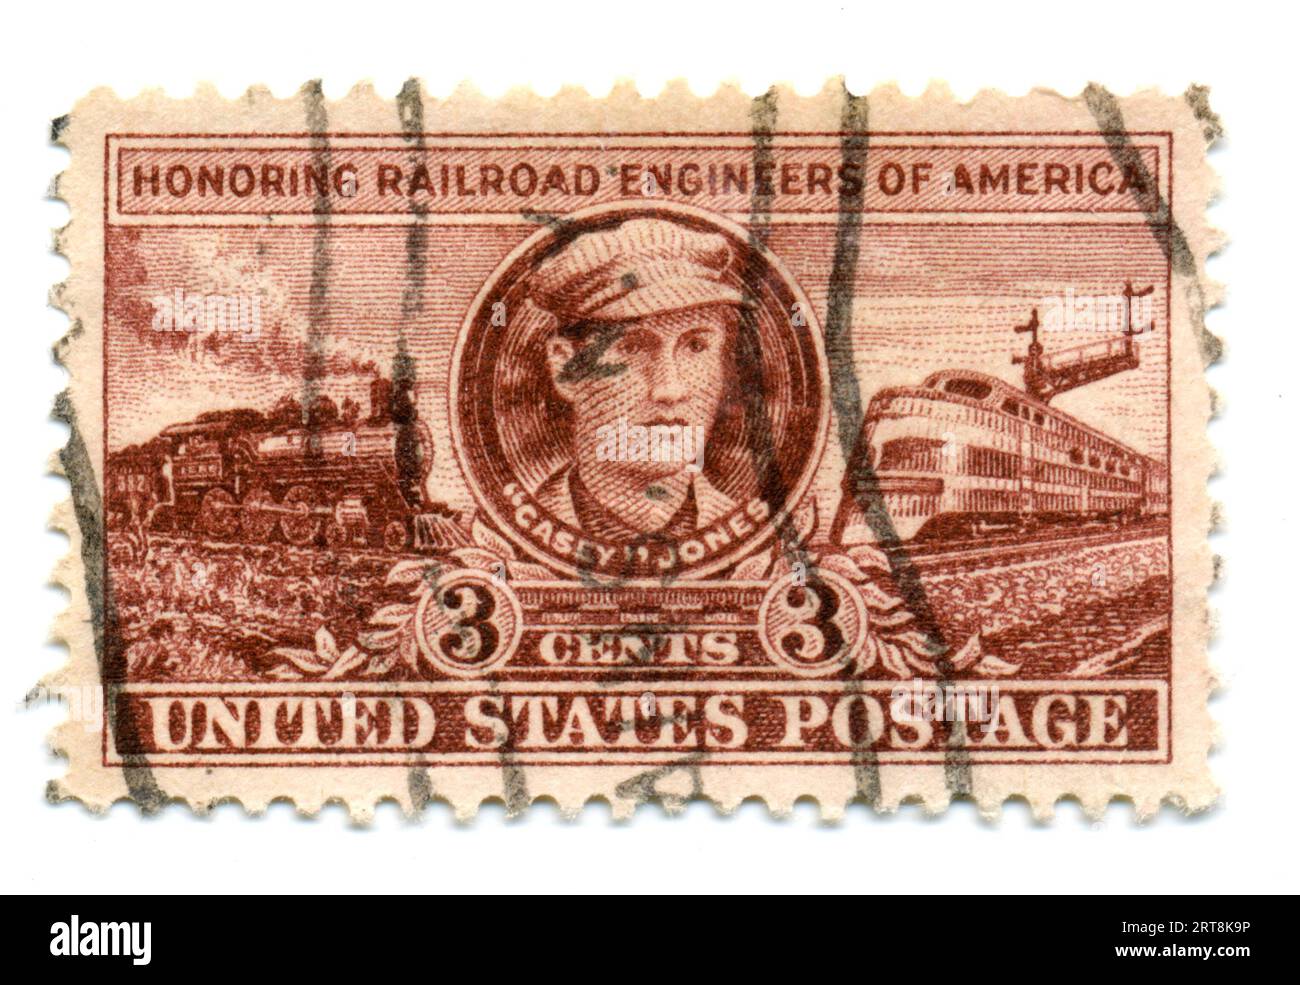 A cancelled U.S. postage stamp honoring railroad engineers of America issued in 1950. Stock Photo